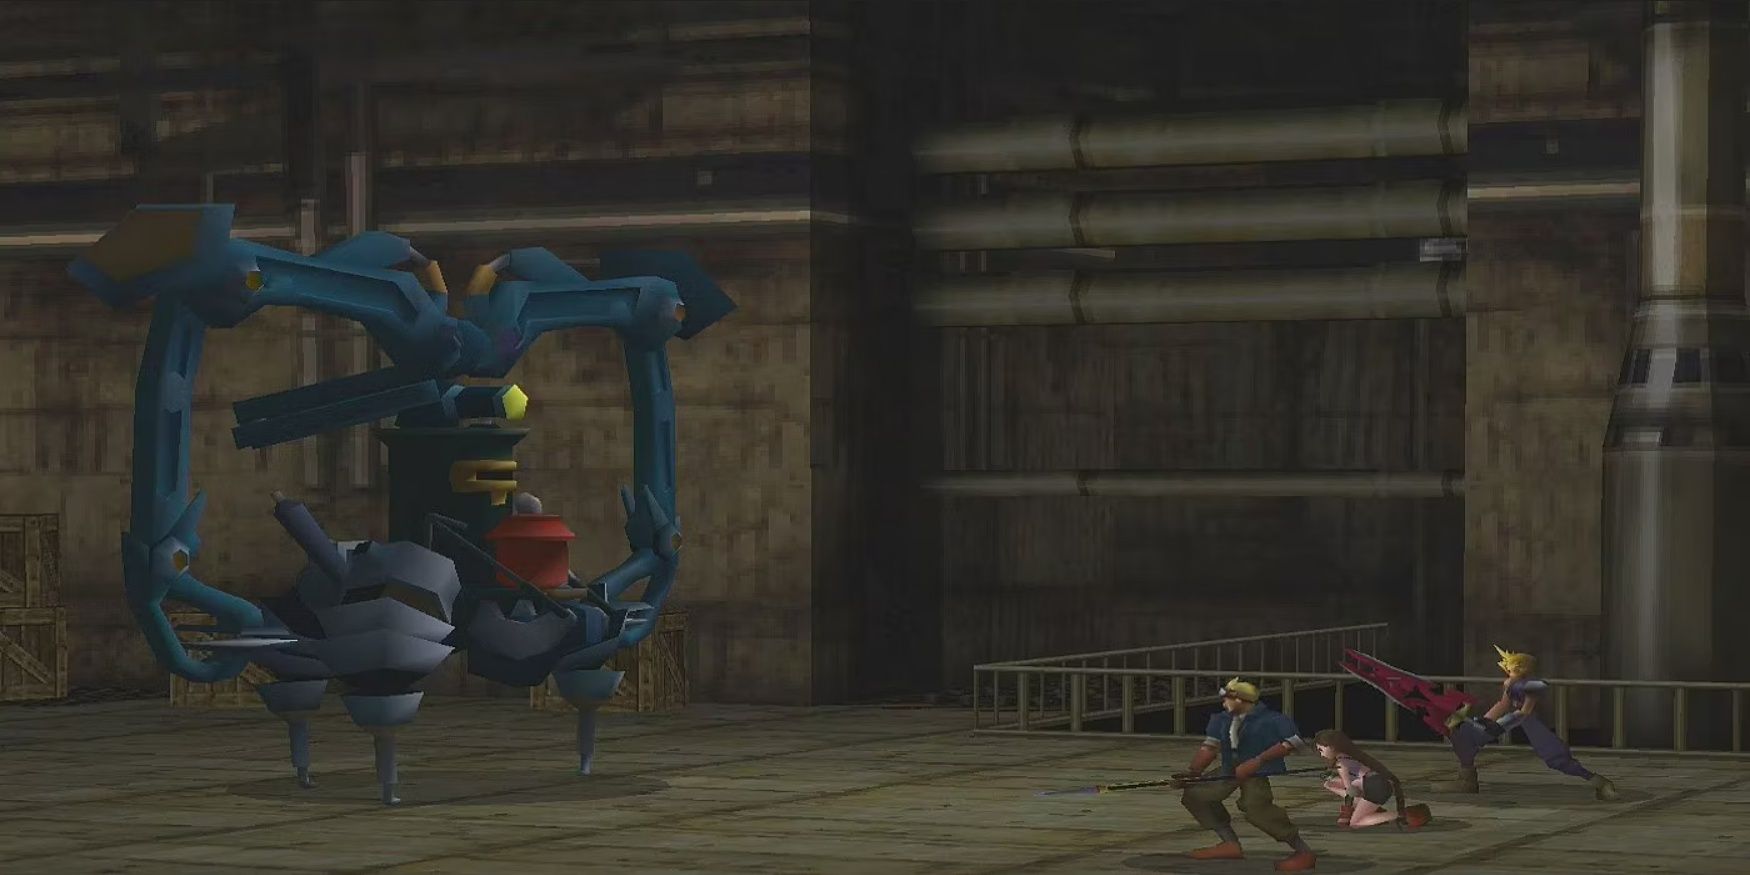 Cid, Tifa, and Cloud battle Carry Armor in Final Fantasy 7